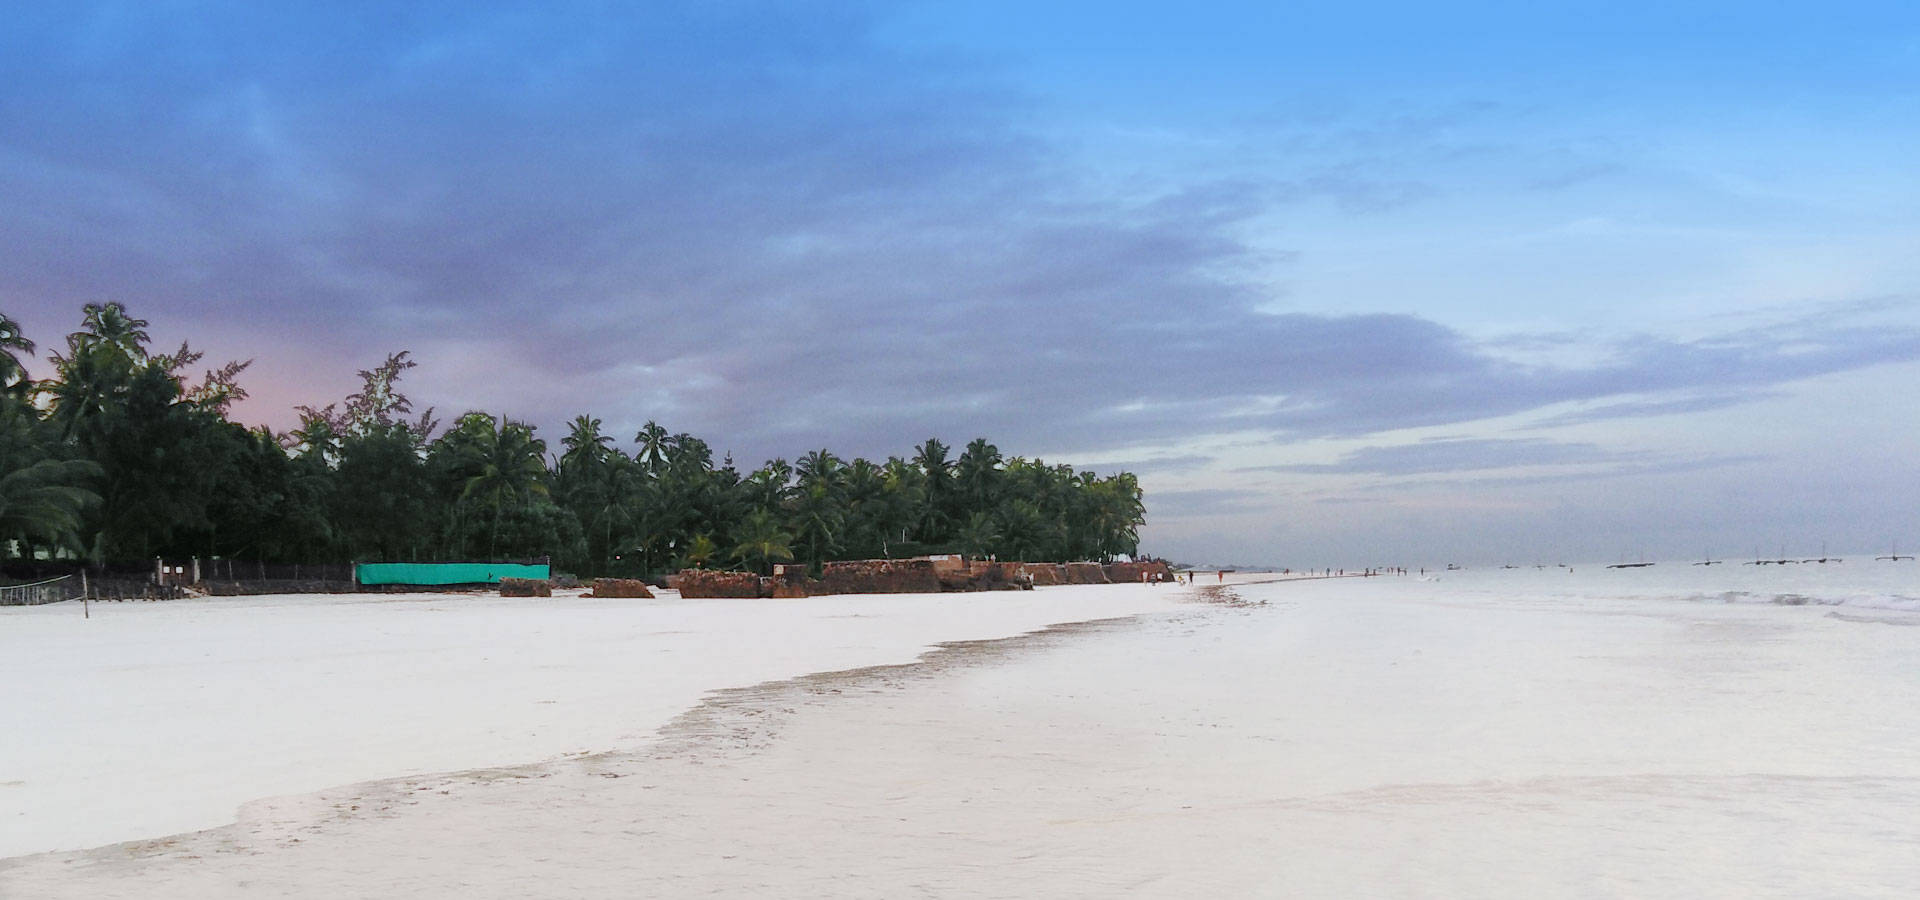 Discover Diani